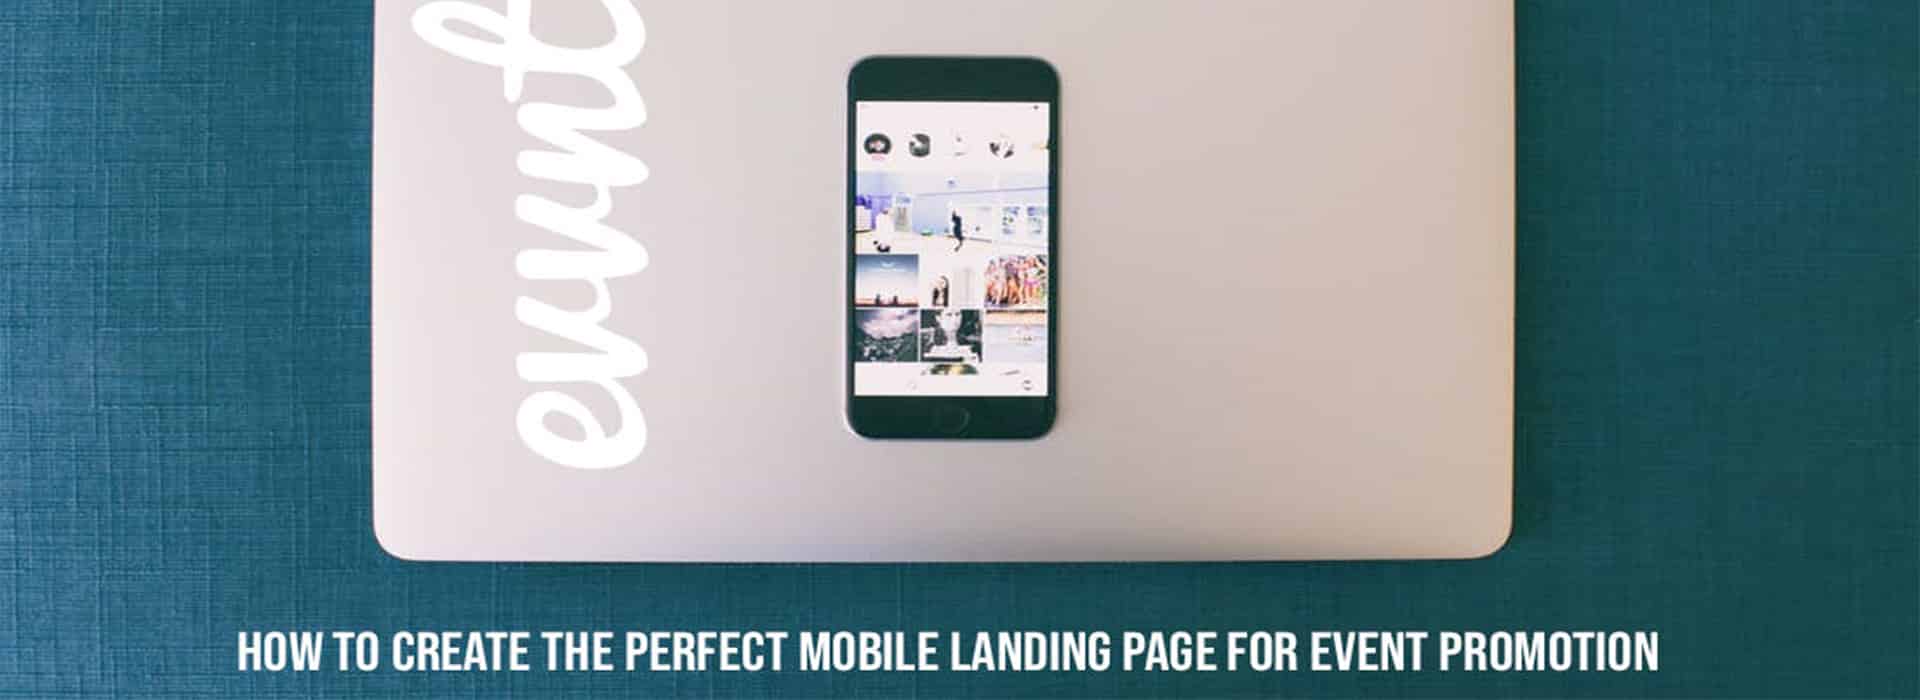 How to Create the Perfect Mobile Landing Page for Event Promotion